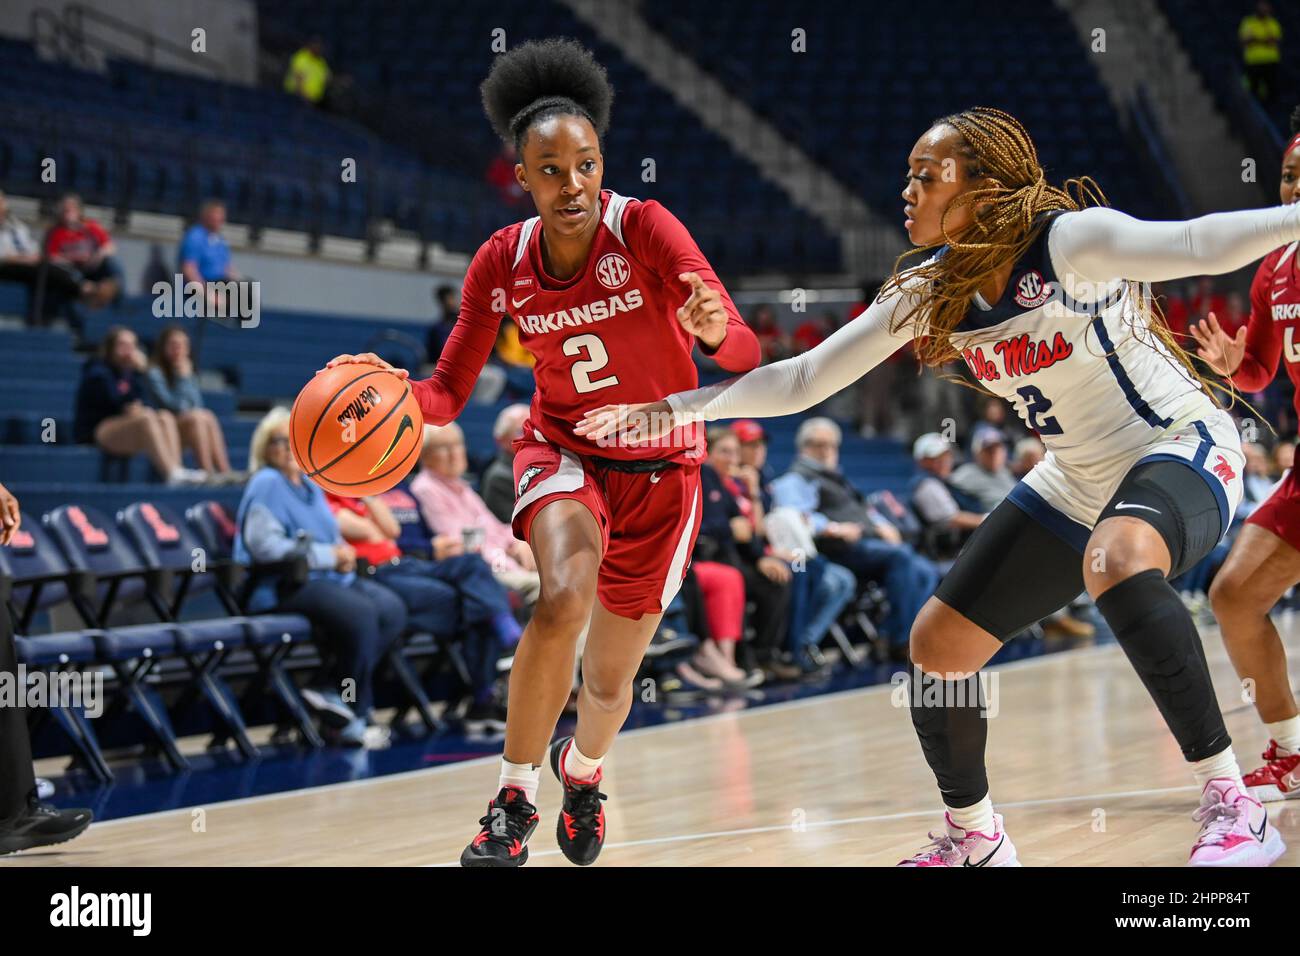 Oxford, MS, USA. 22nd Feb, 2022. Arkansas guard Samara Spencer (2) drives against Ole' Miss guard Mimi Reid (2) during the college basketball game between the Arkansas Razorbacks and the Ole' Miss Rebels on February 22, 2022 at the SJB Pavilion in Oxford, MS. (Photo by: Kevin Langley/CSM). Credit: csm/Alamy Live News Stock Photo